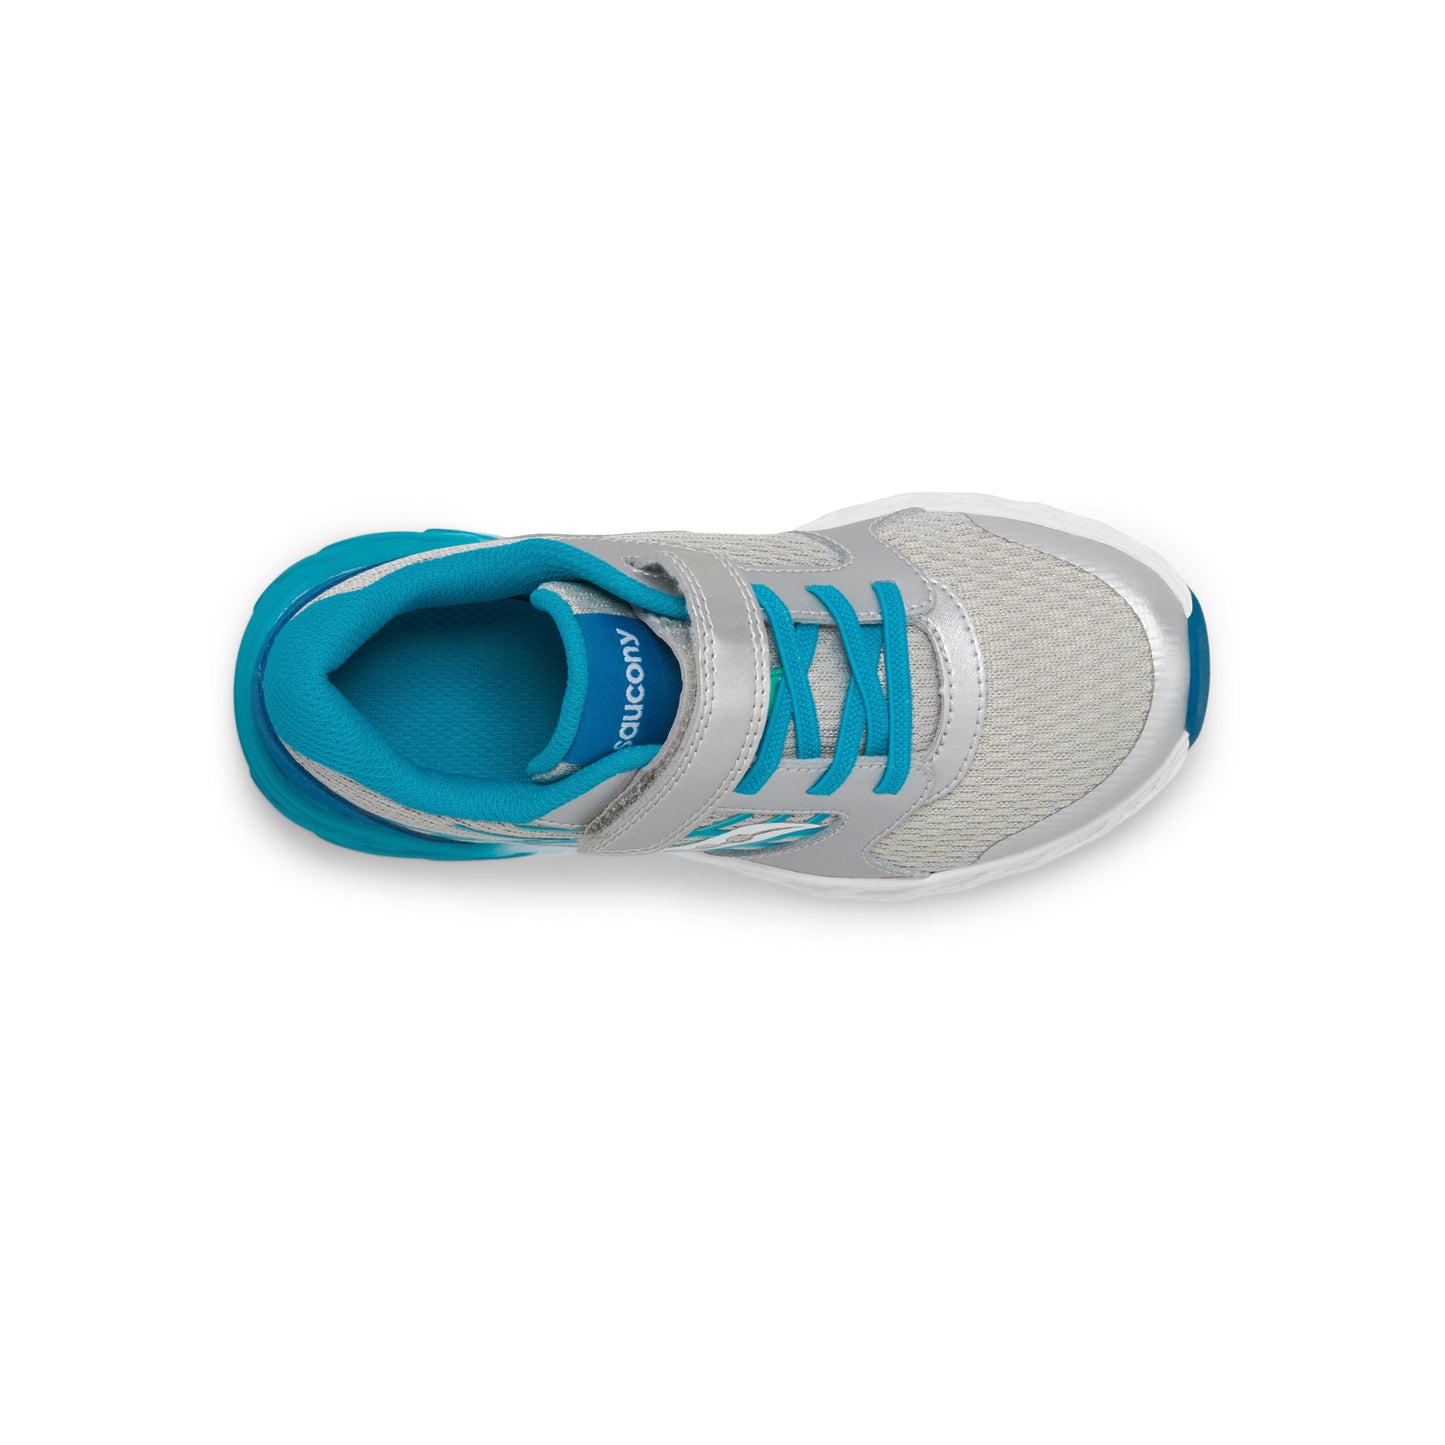 wind-ac-20-sneaker-bigkid-turquoise-silver__Turquoise/Silver_6